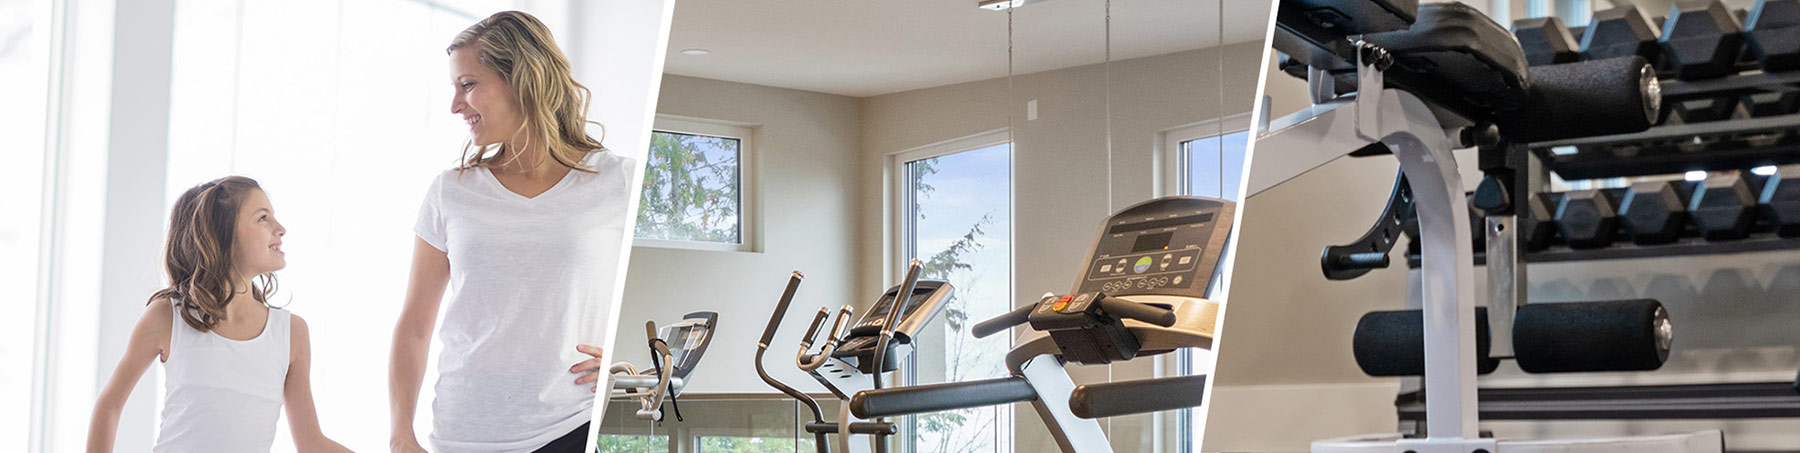 Designing a Family’s Home Gym